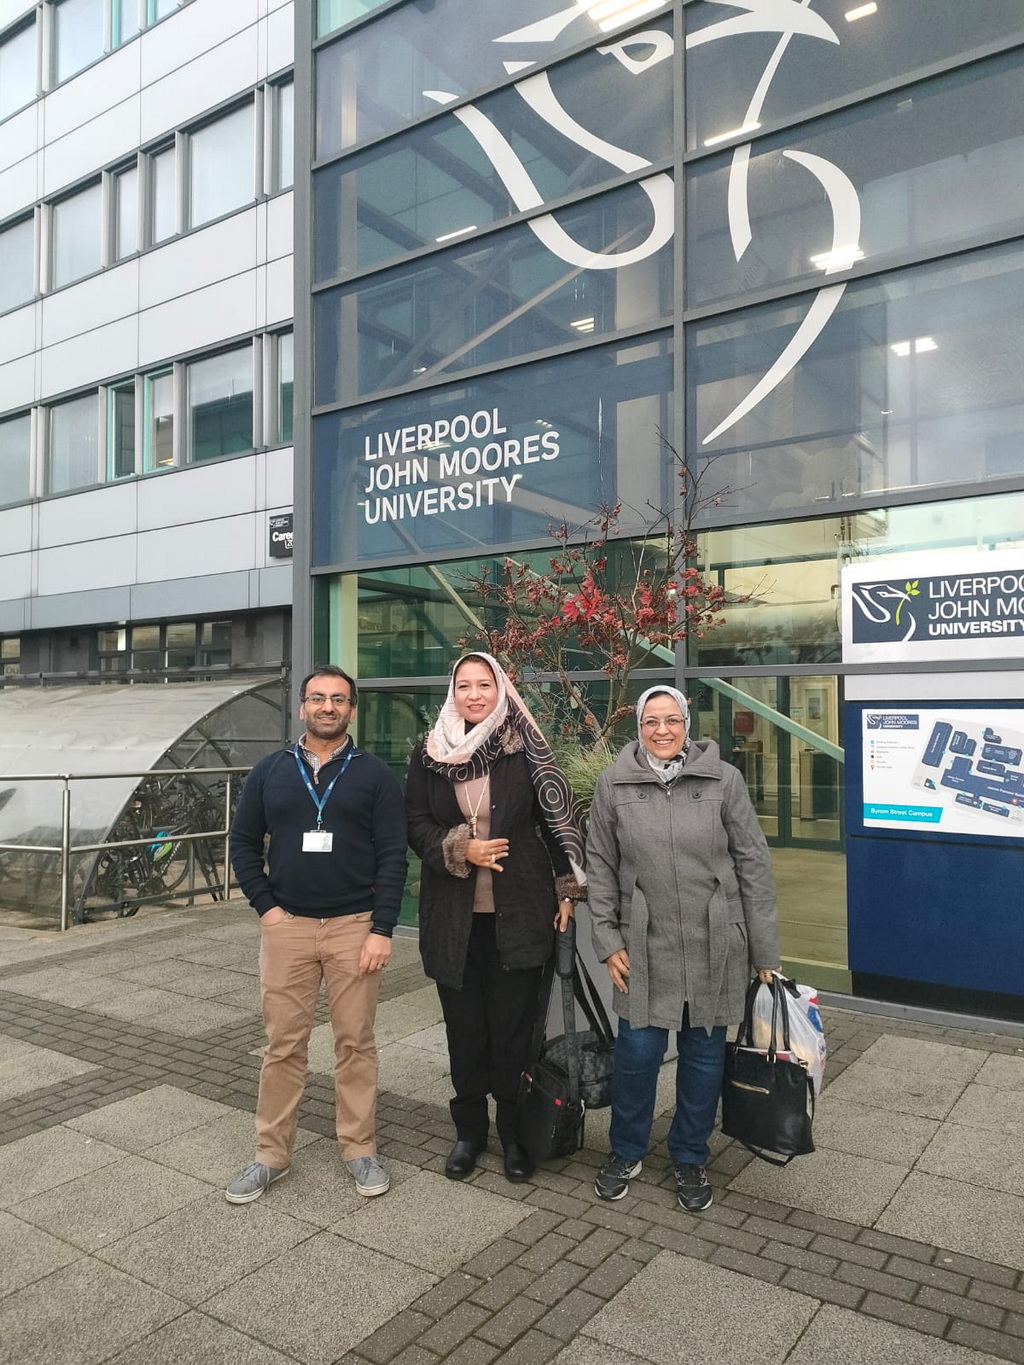 A Delegation from the Faculty of Veterinary Medicine, Mansoura University Visits The Royal Veterinary College at London University, and Liverpool John Moores University